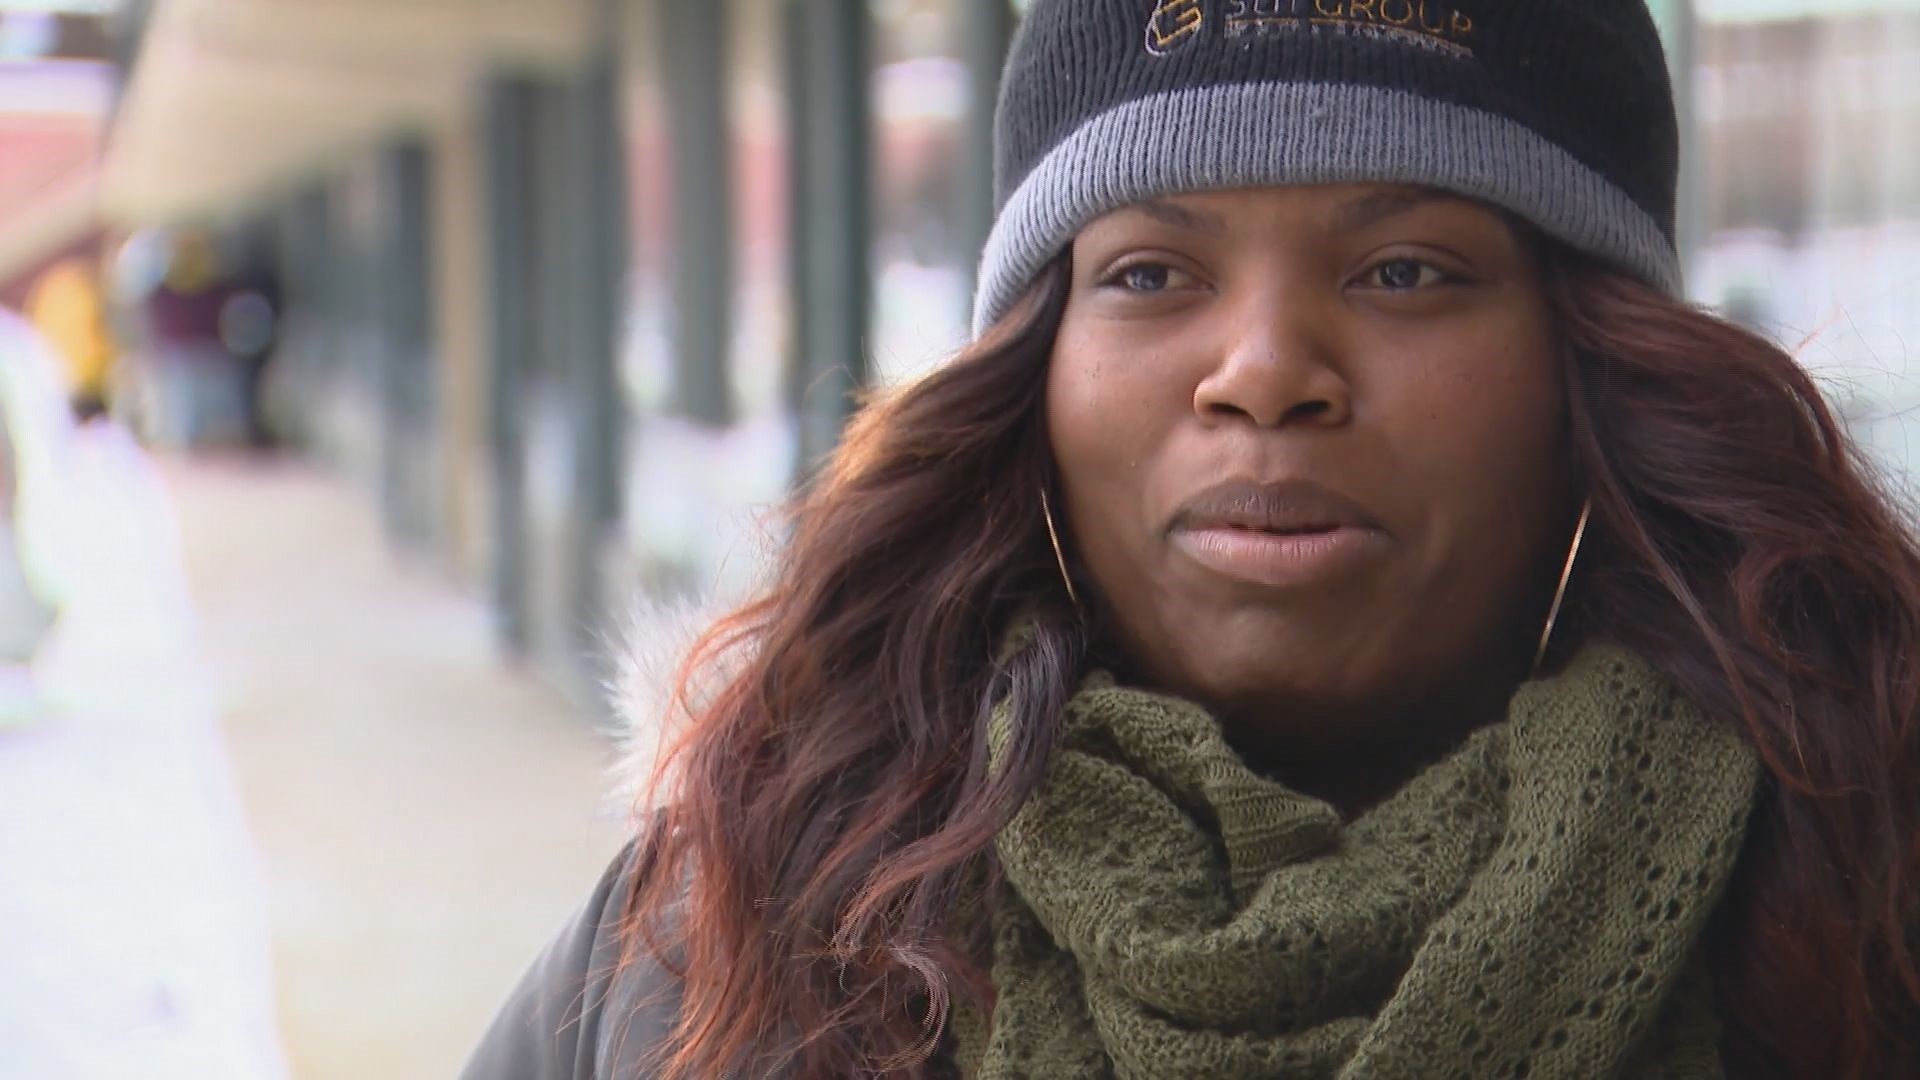 Candice Payne used her personal American Express card to get homeless people off the streets during record-setting freeze in Chicago.